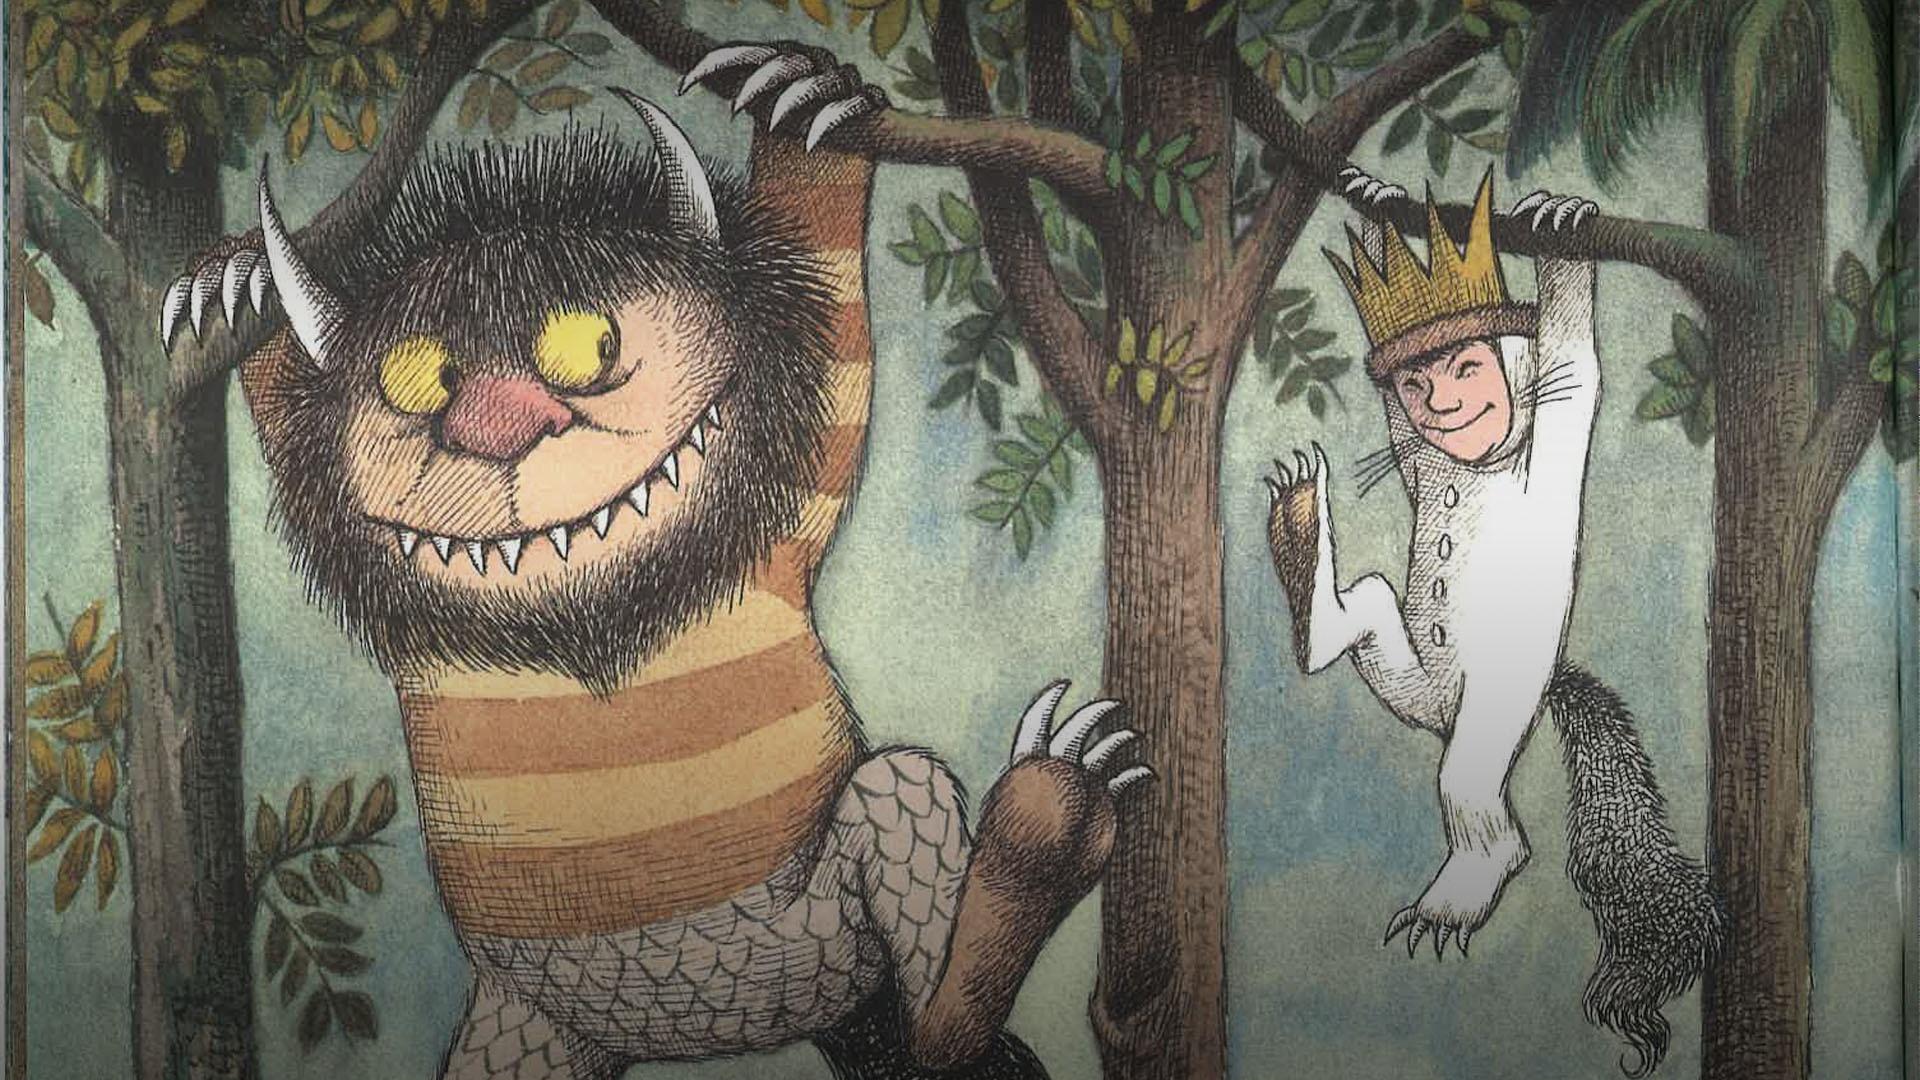 How a Children’s Book Introduced Us To Our Inner Demons